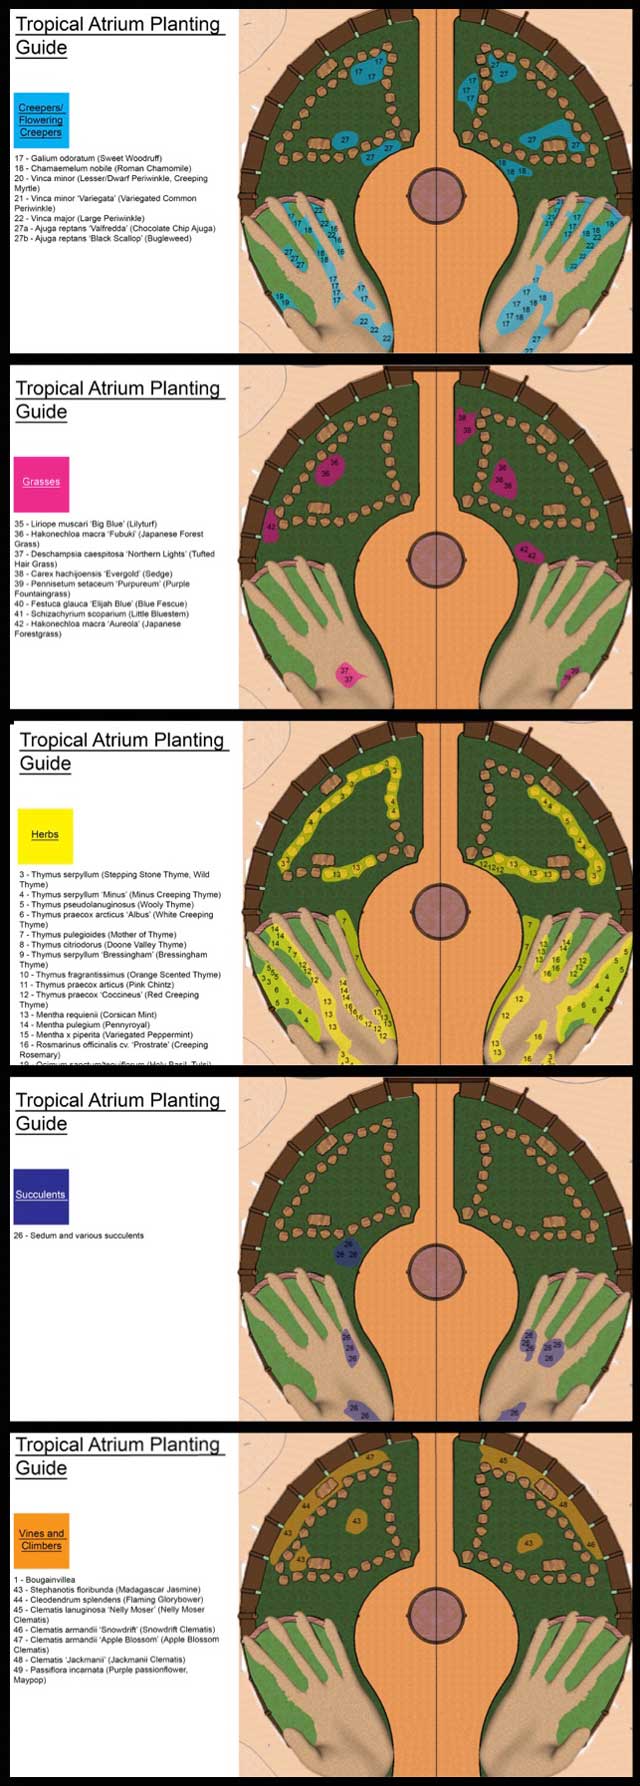 Shadi Kennedy (Artist and Graphic Designer) also created these individual planting plan maps for the Tropical Atrium Planting and Harvesting page. 